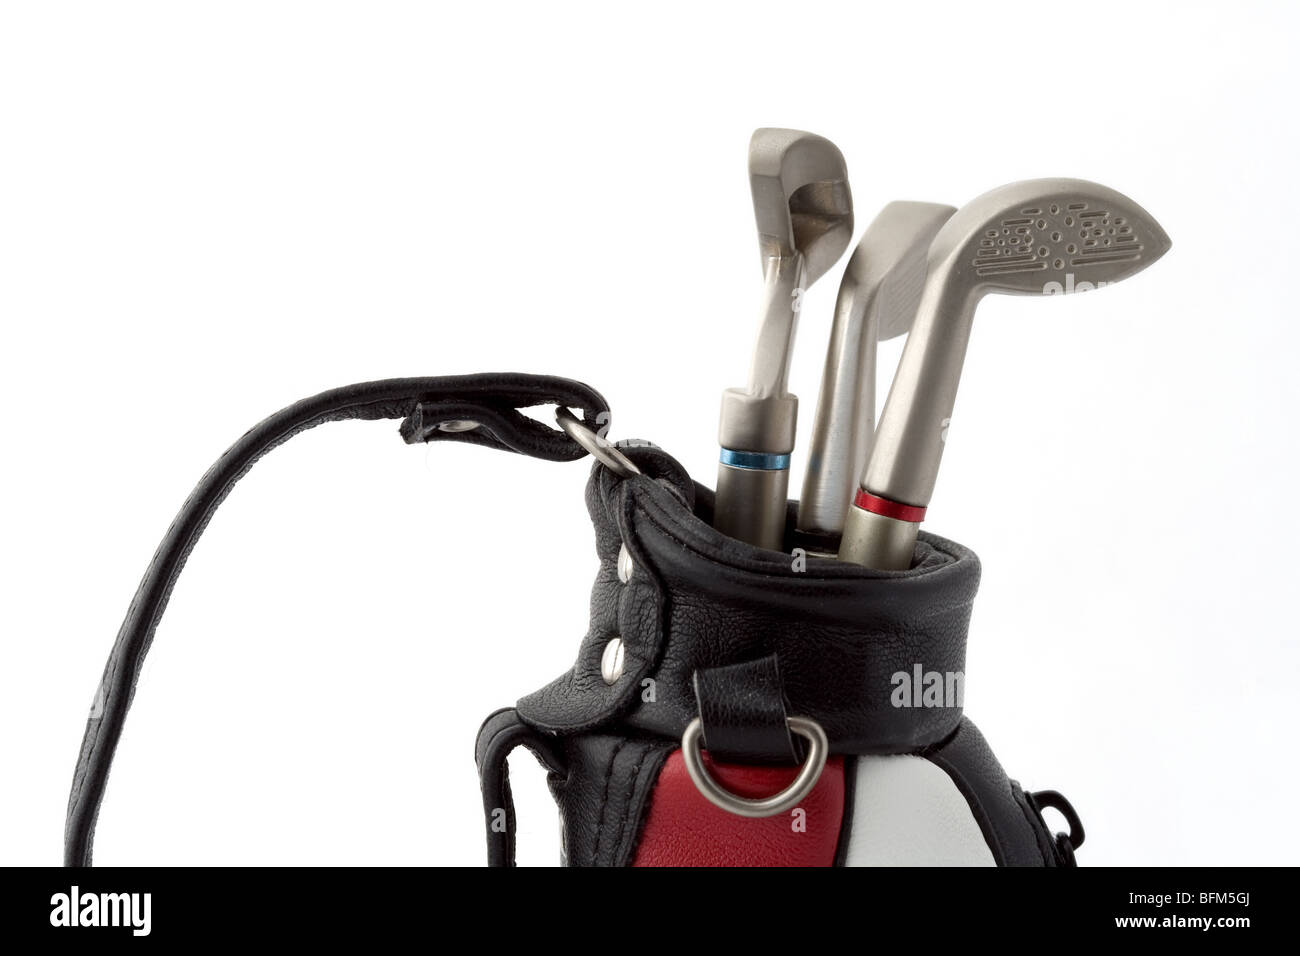 Miniature golf bag detail - clipping path included Stock Photo